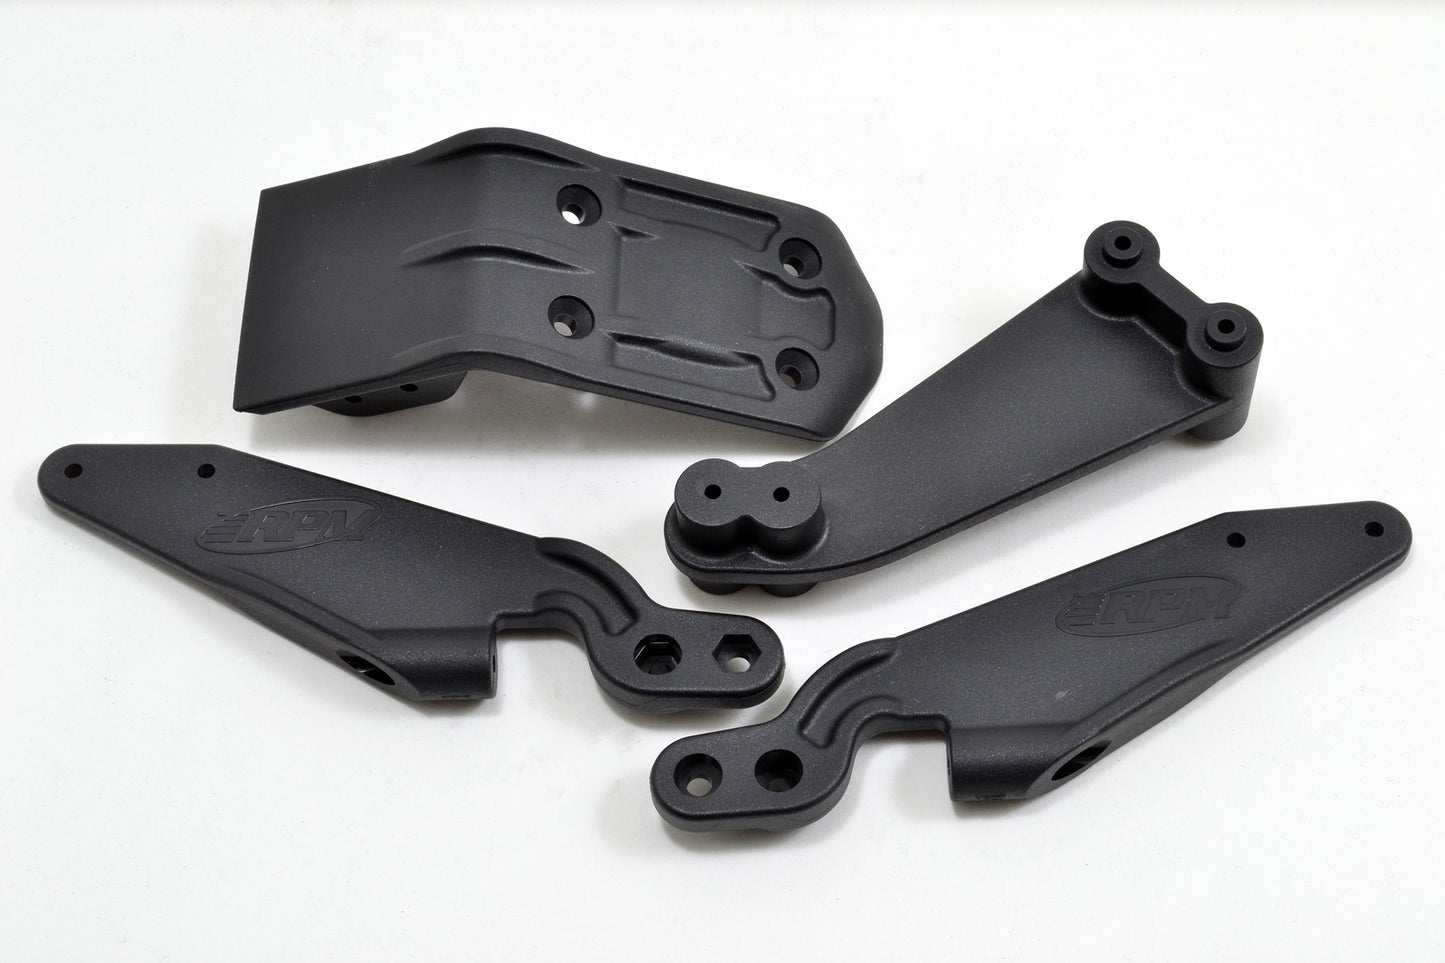 RPM 81802 HD Wing Mount System - Black